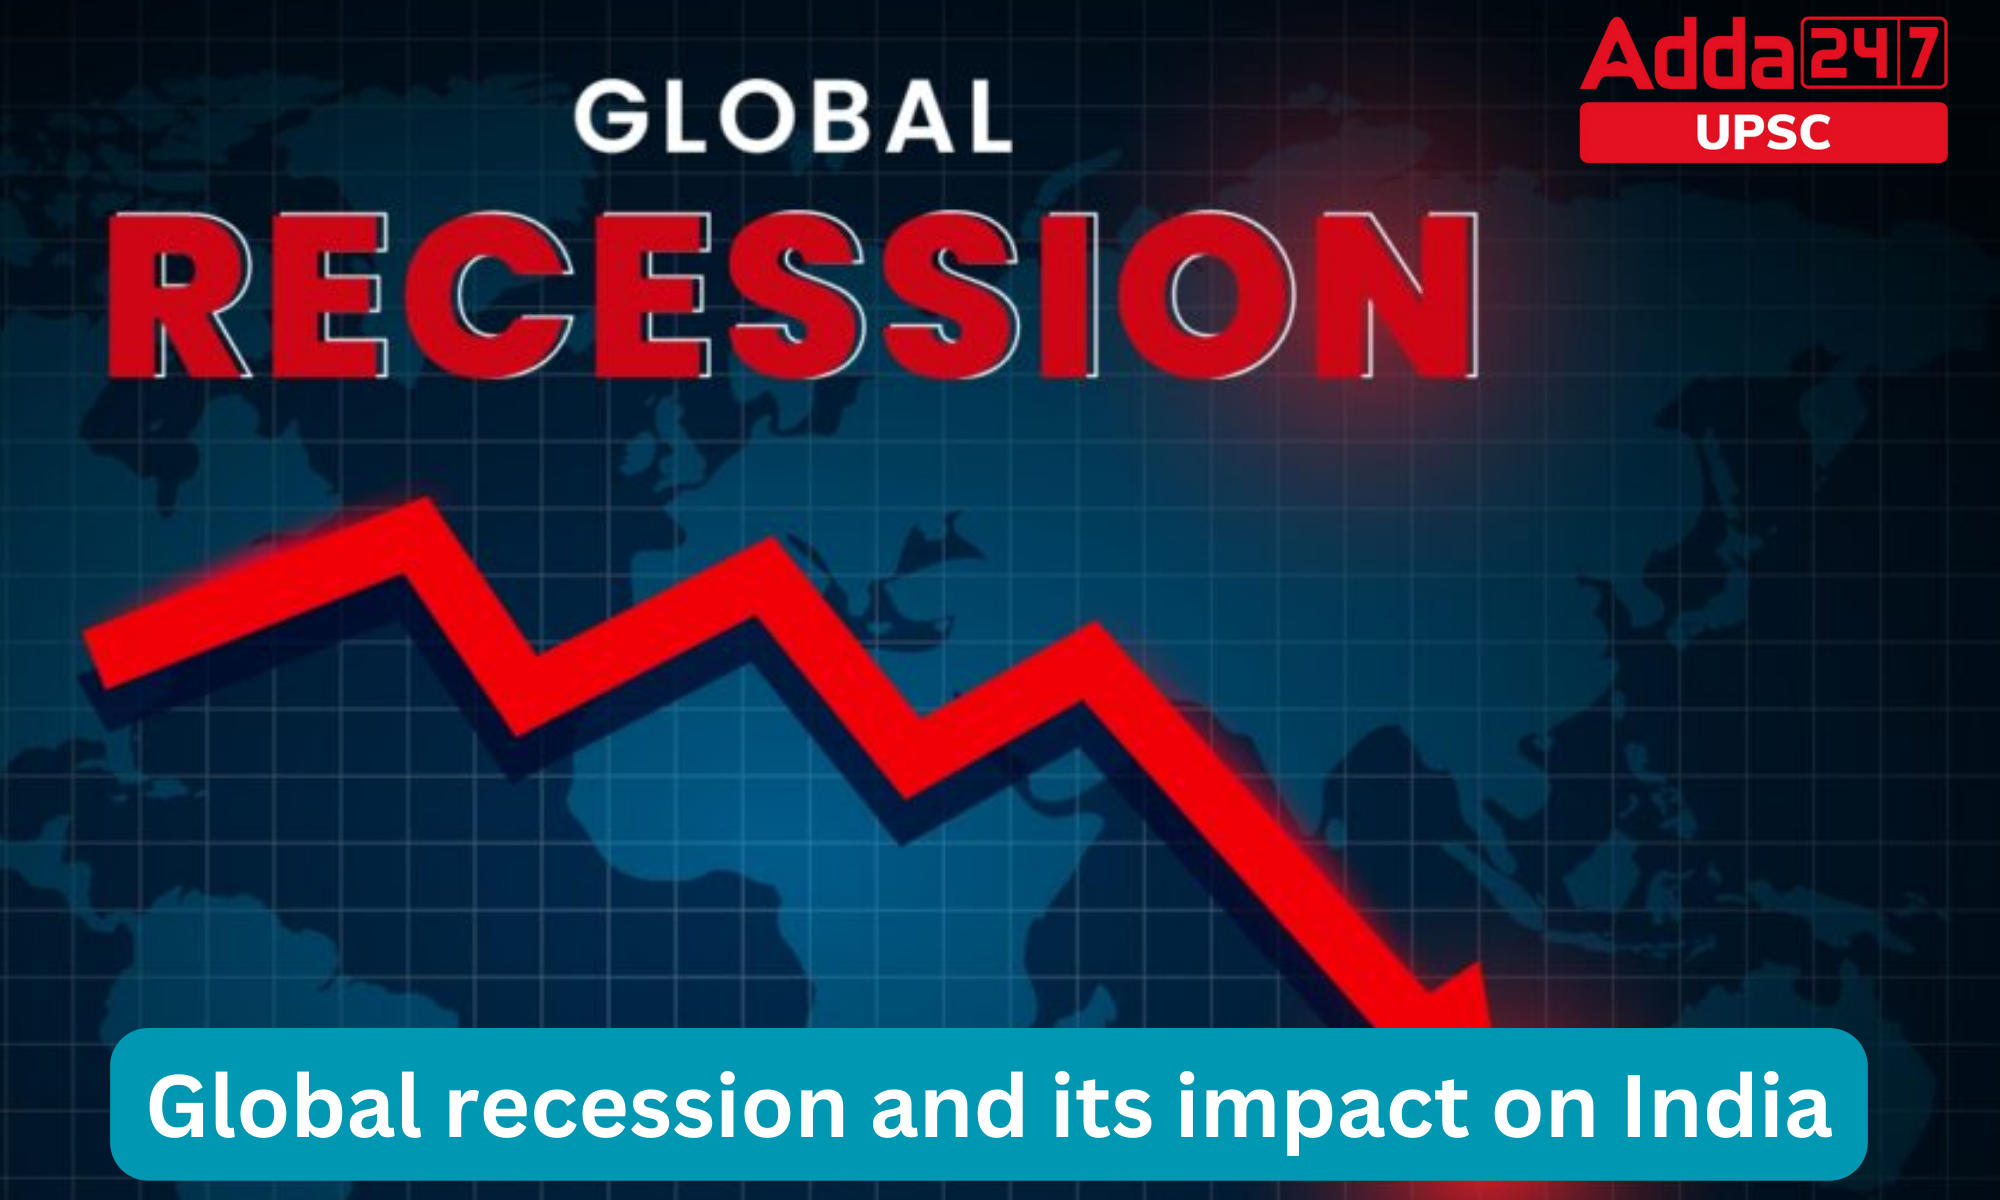 Global recession and its impact on India